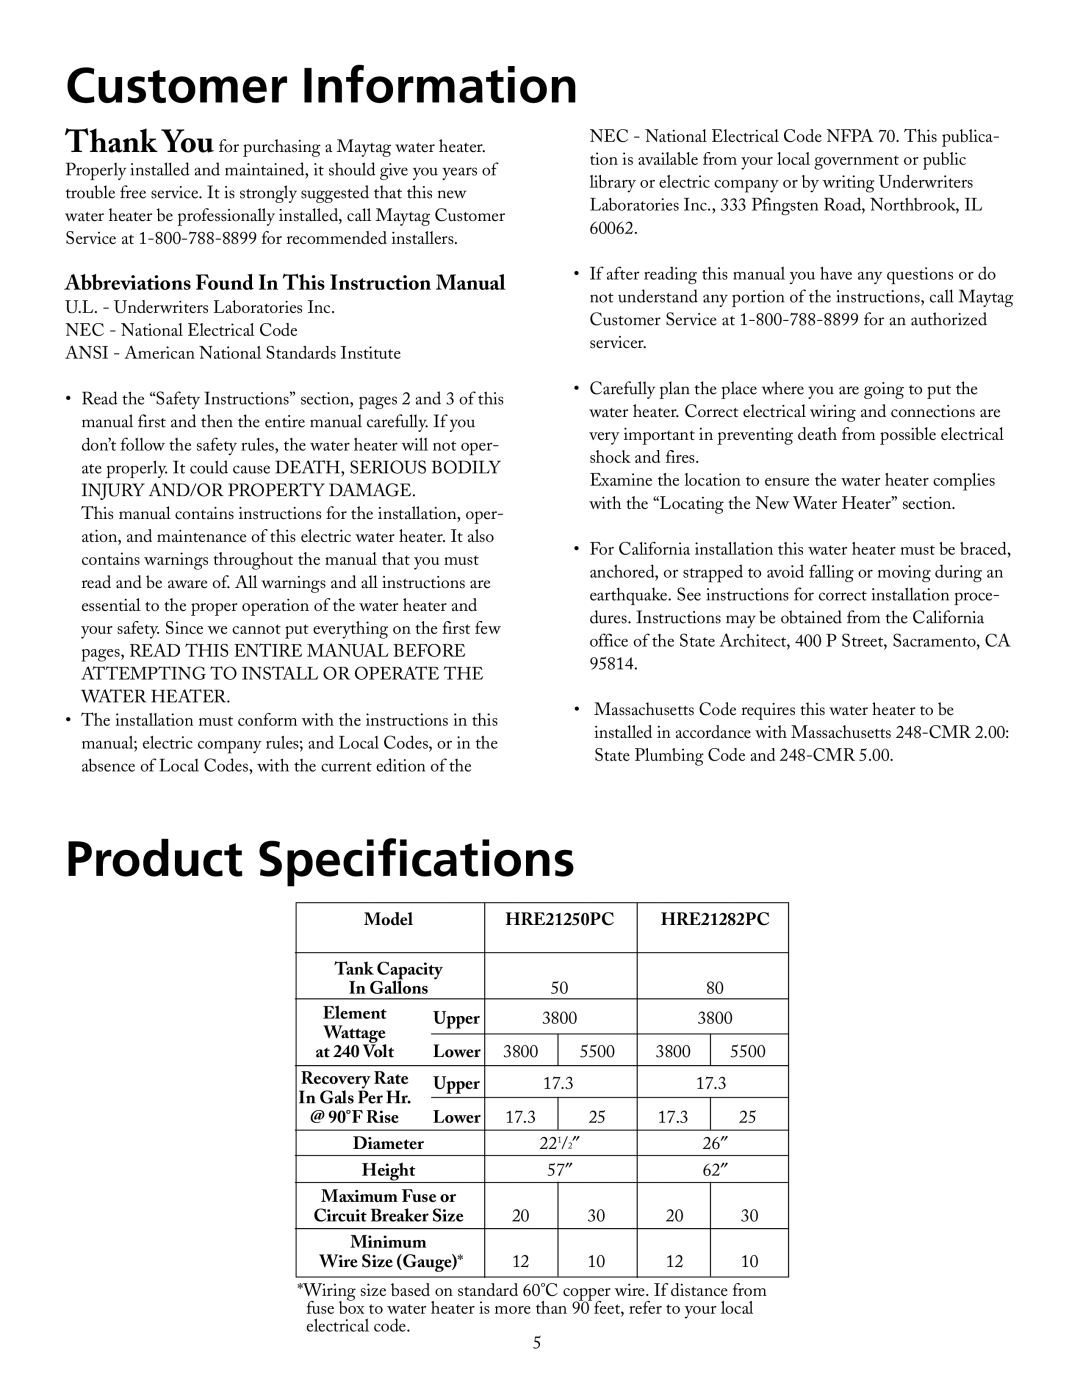 Maytag HRE21282PC Customer Information, Product Specifications, Model, HRE21250PC, Tank Capacity, In Gallons, Element 